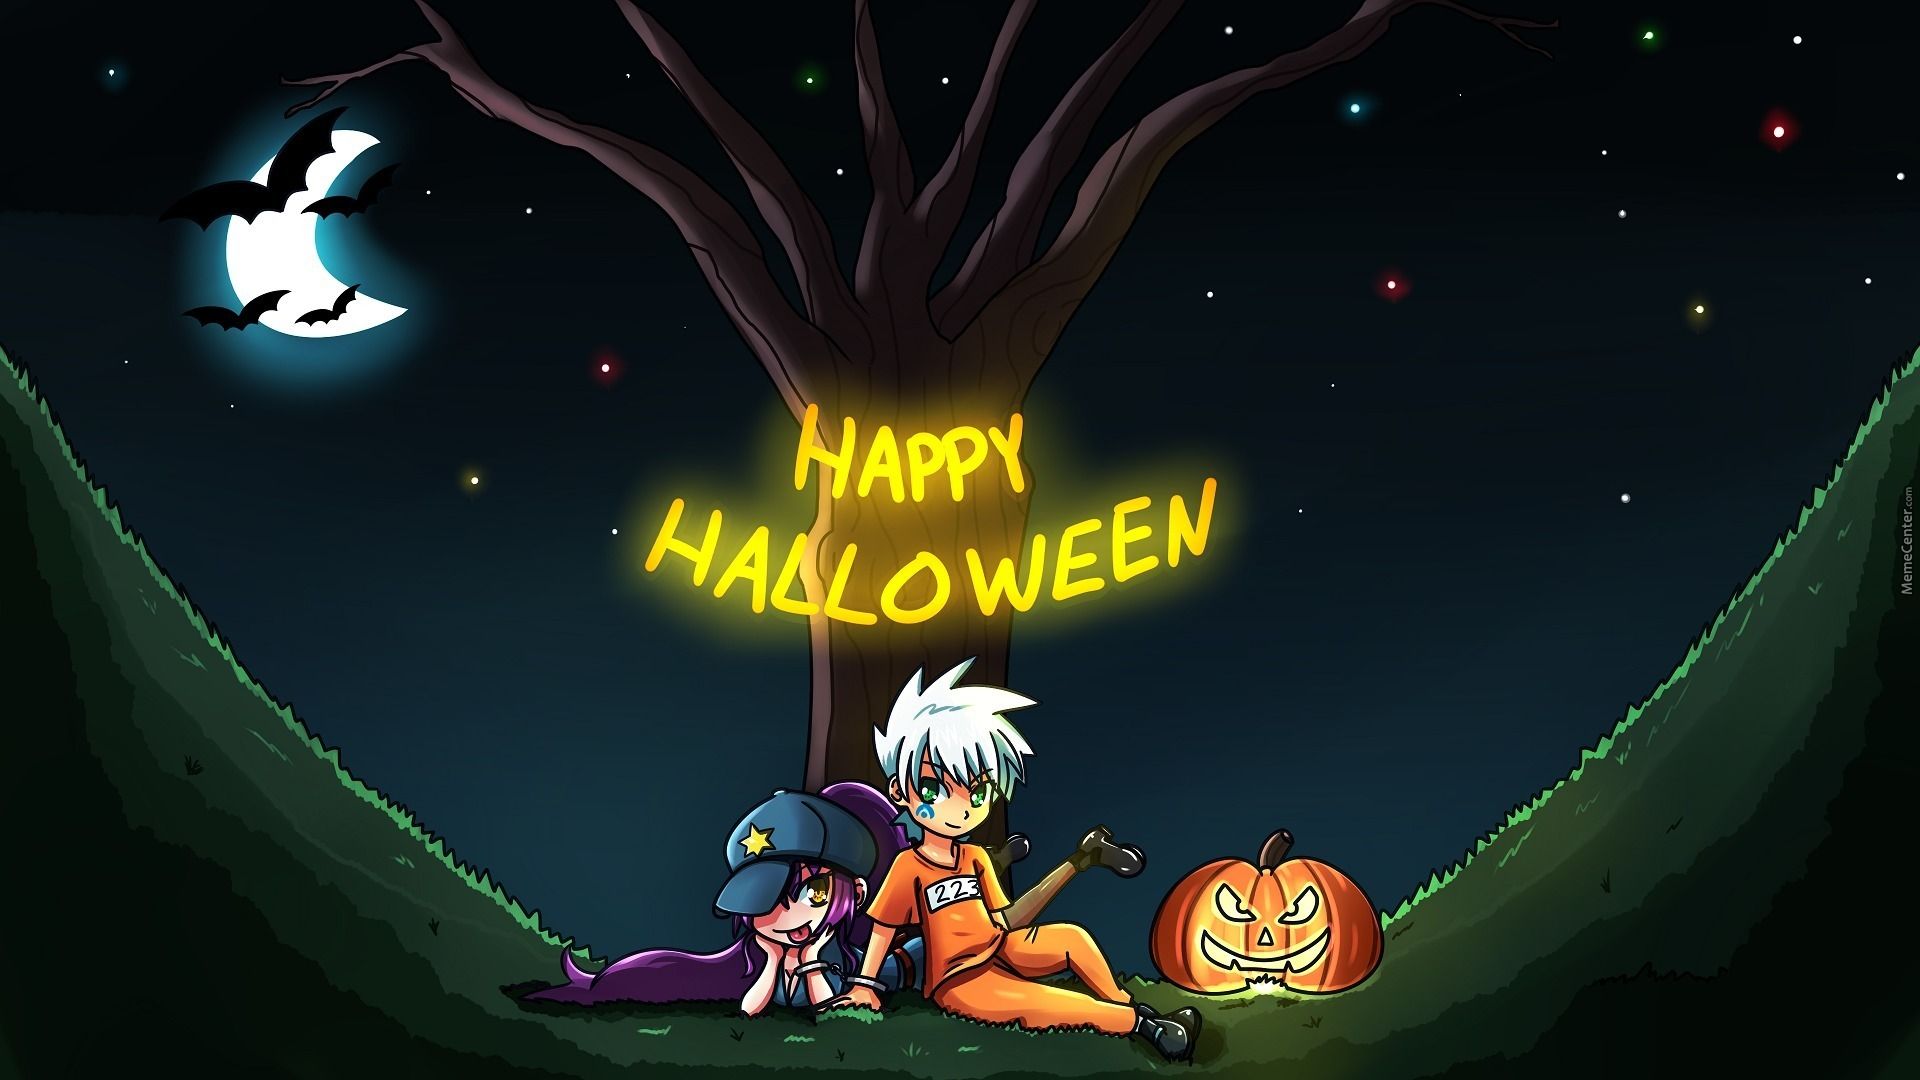 Free download Happy Halloween Wallpaper 2015 by recyclebin Meme Center [1920x1080] for your Desktop, Mobile & Tablet. Explore Wallpaper Happy Halloween. Halloween Wallpaper, Scary Happy Halloween Wallpaper, Picture of Happy Halloween Wallpaper